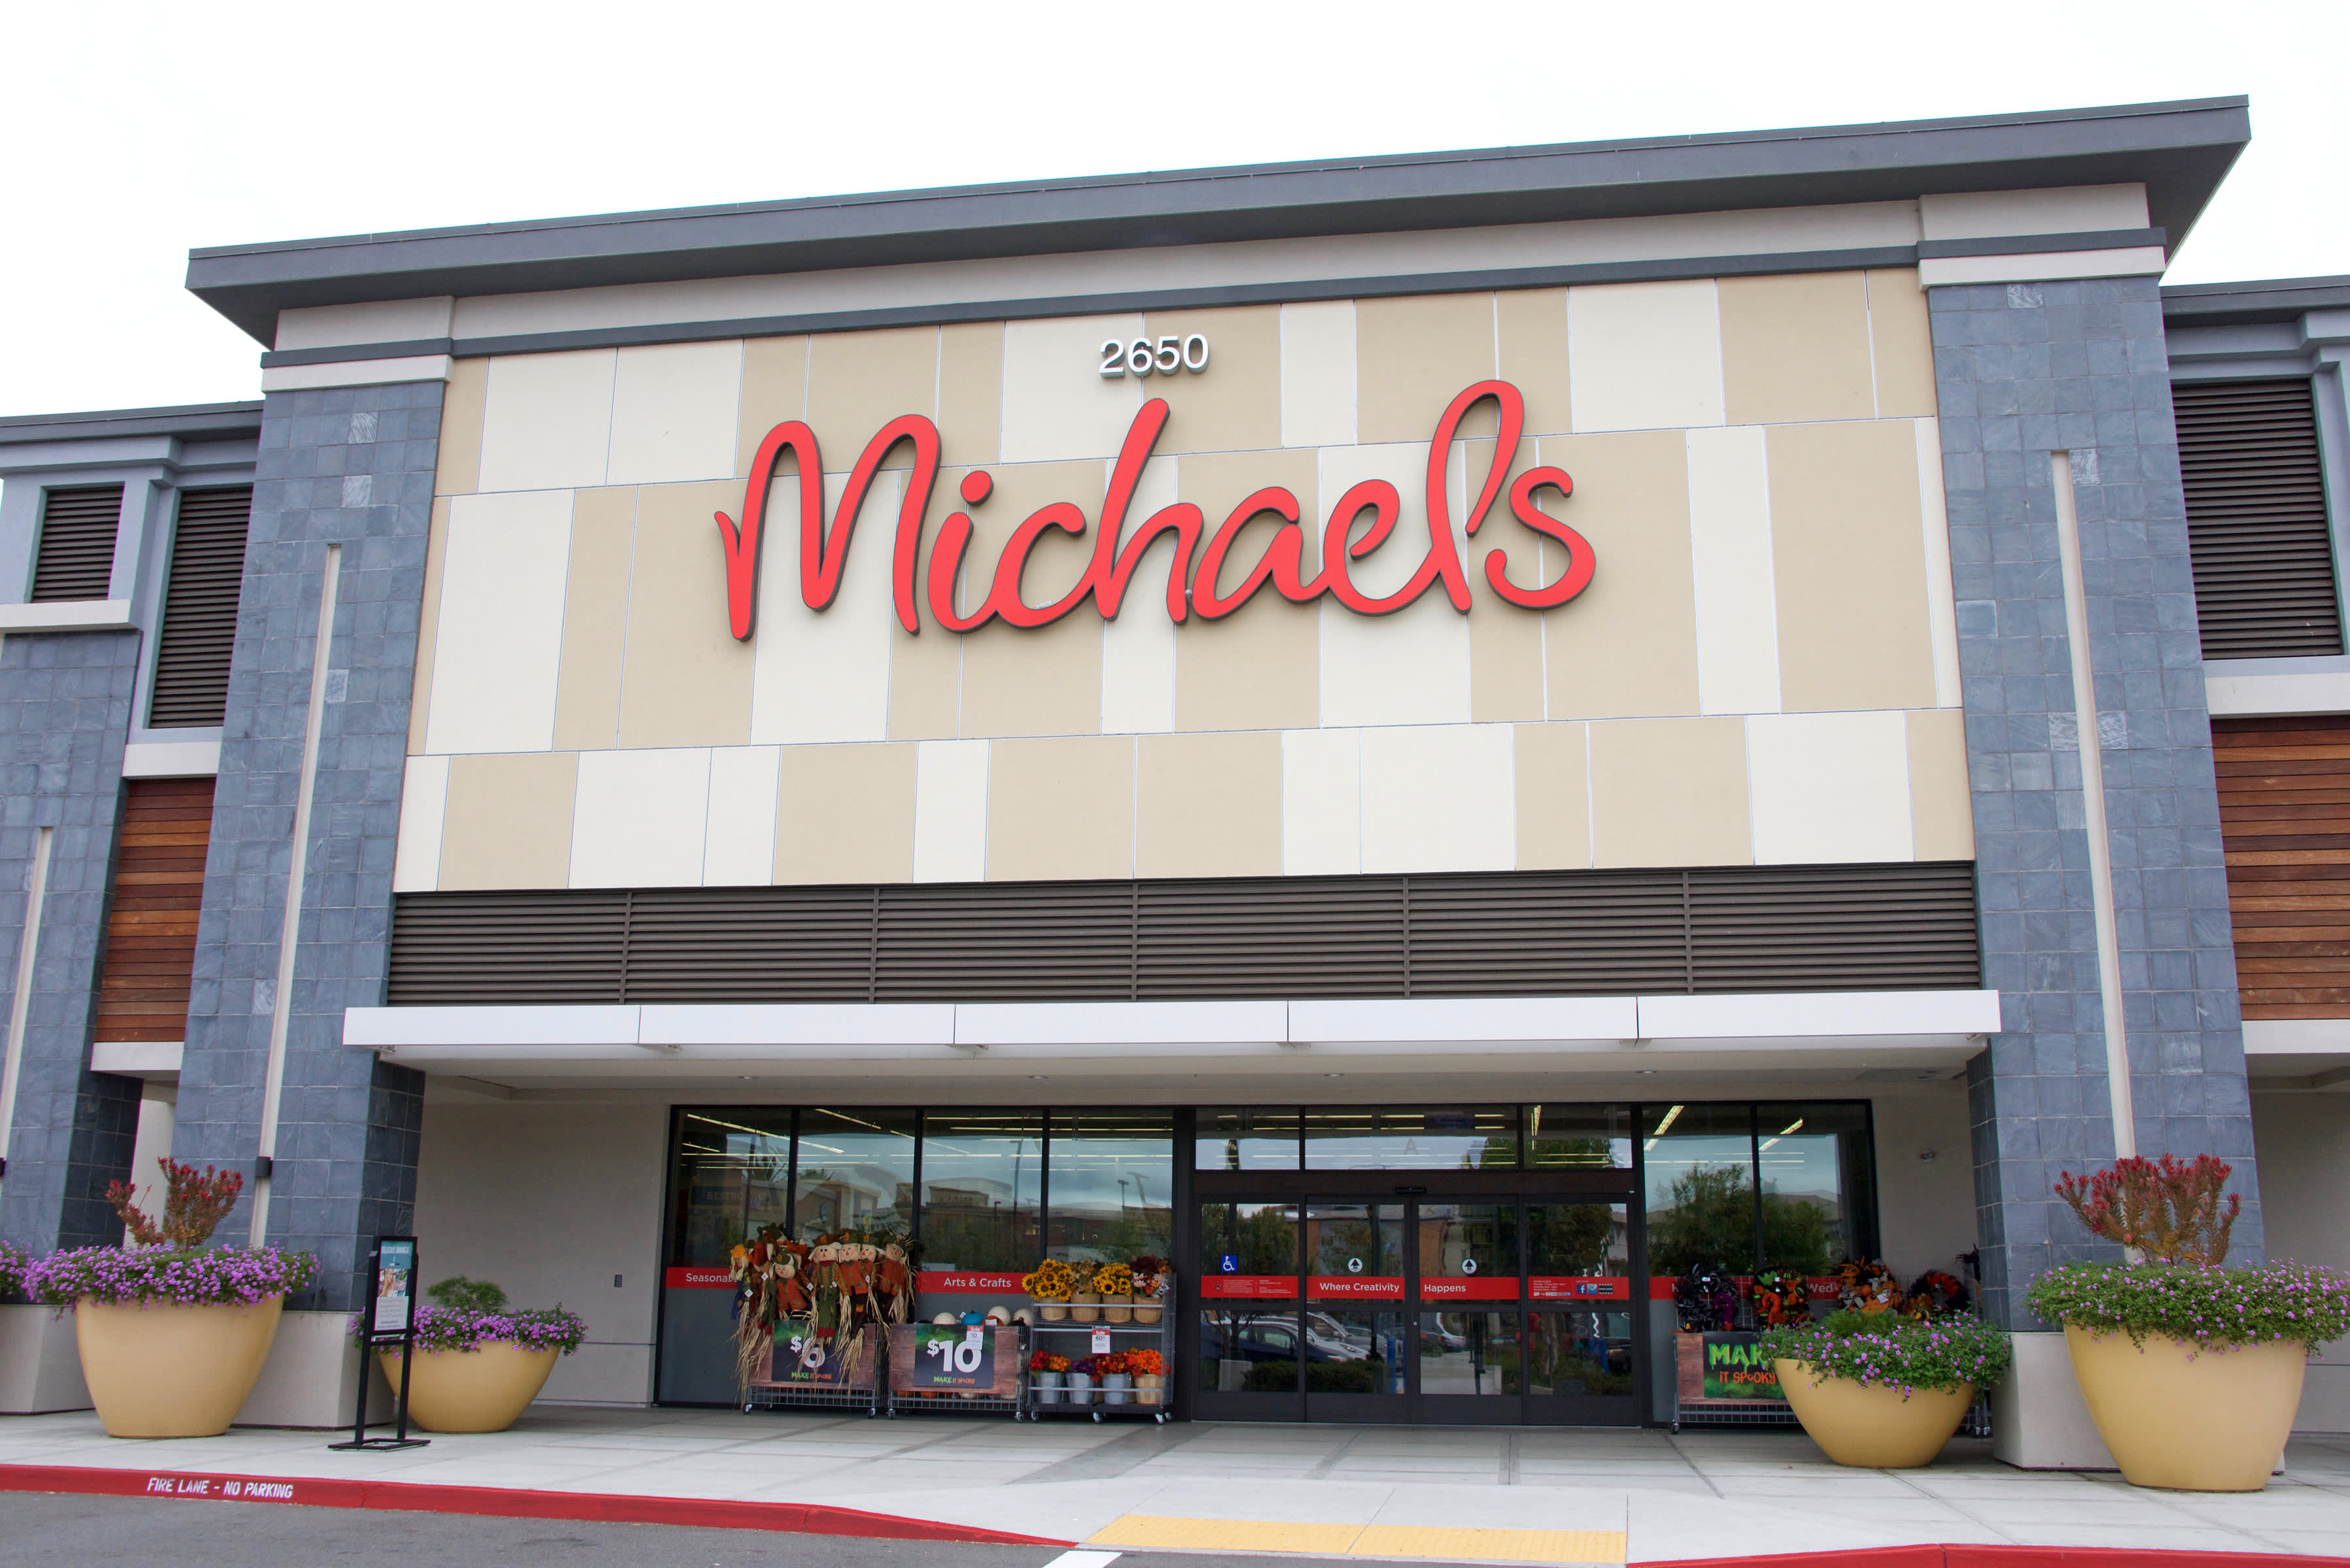 Michaels coupons - 30% off everything after 4pm today at